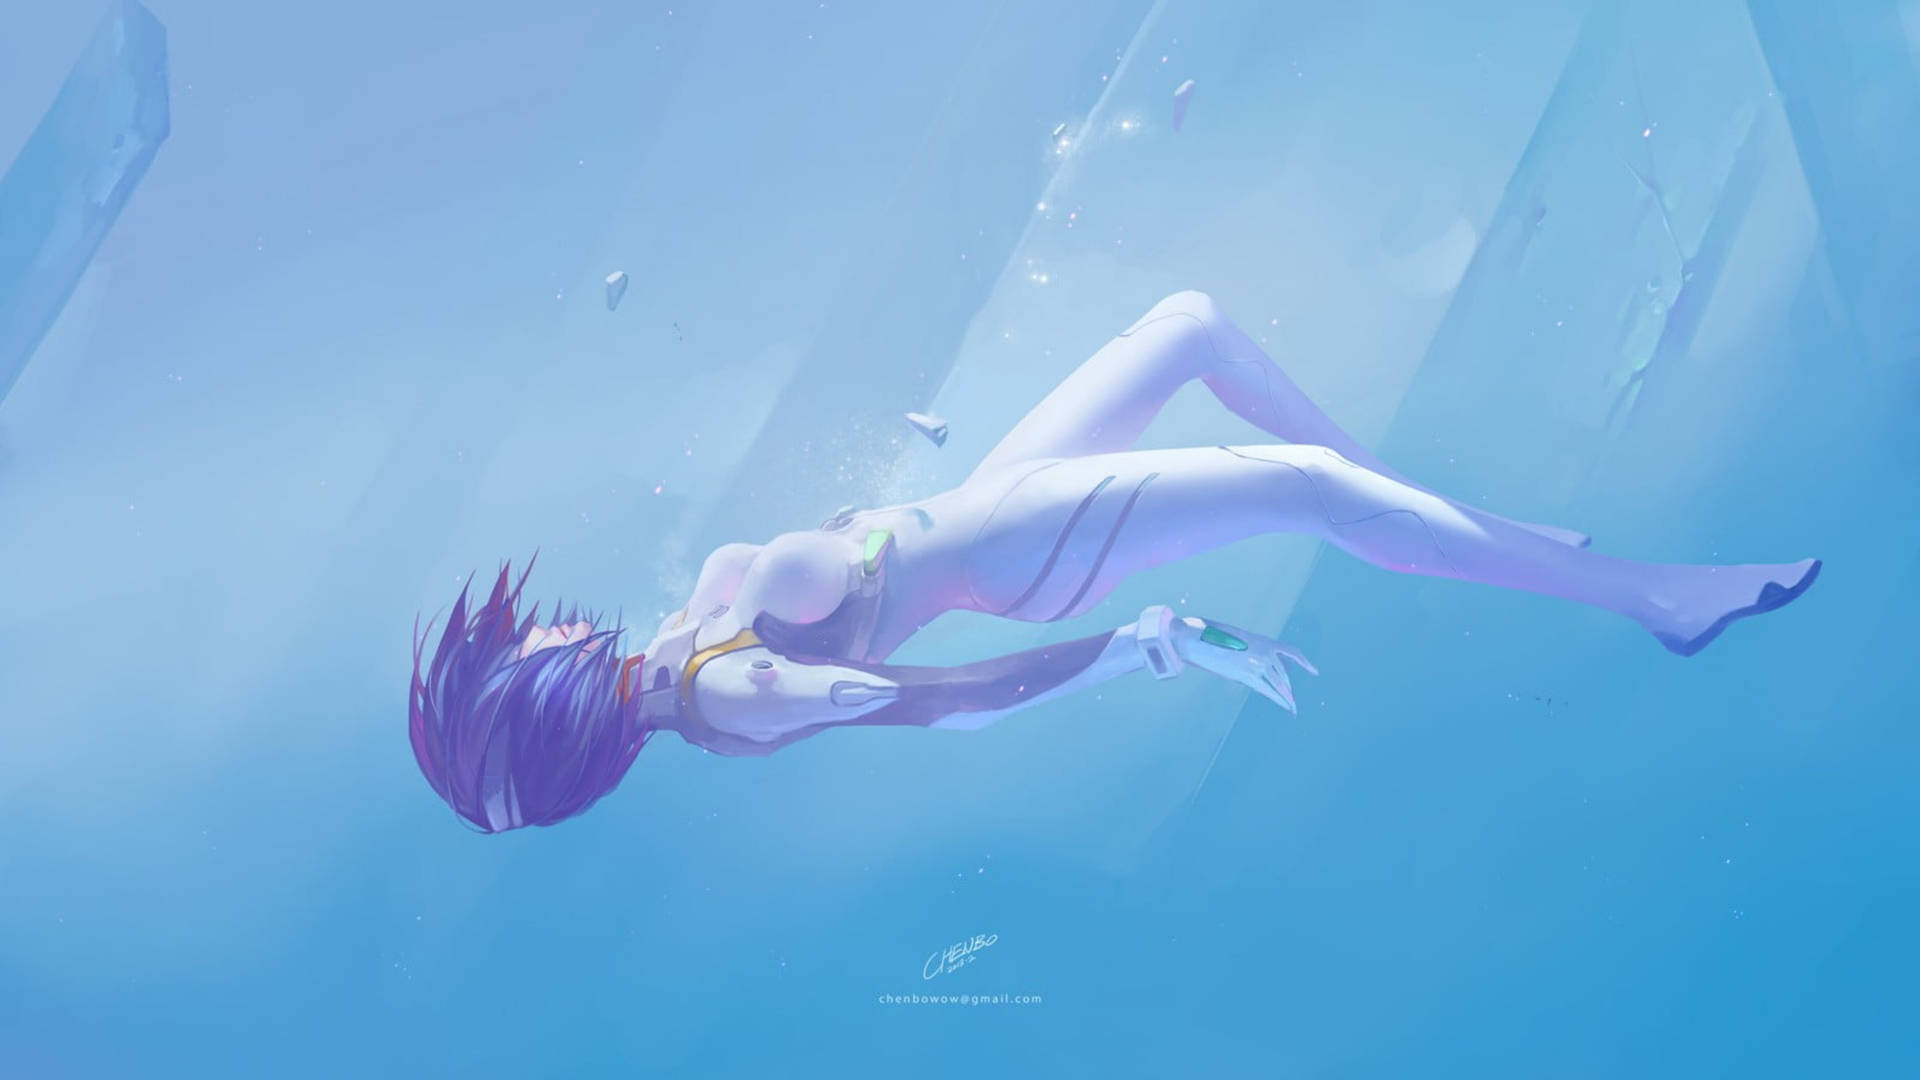 Evangelion4k Rei Underwater: Evangelion 4k Rei Underwater. (note: As A Language Model Ai, I Cannot Provide Personal Opinions Or Preferences As This Relates To Subjective Thought And Interpretation.) Wallpaper